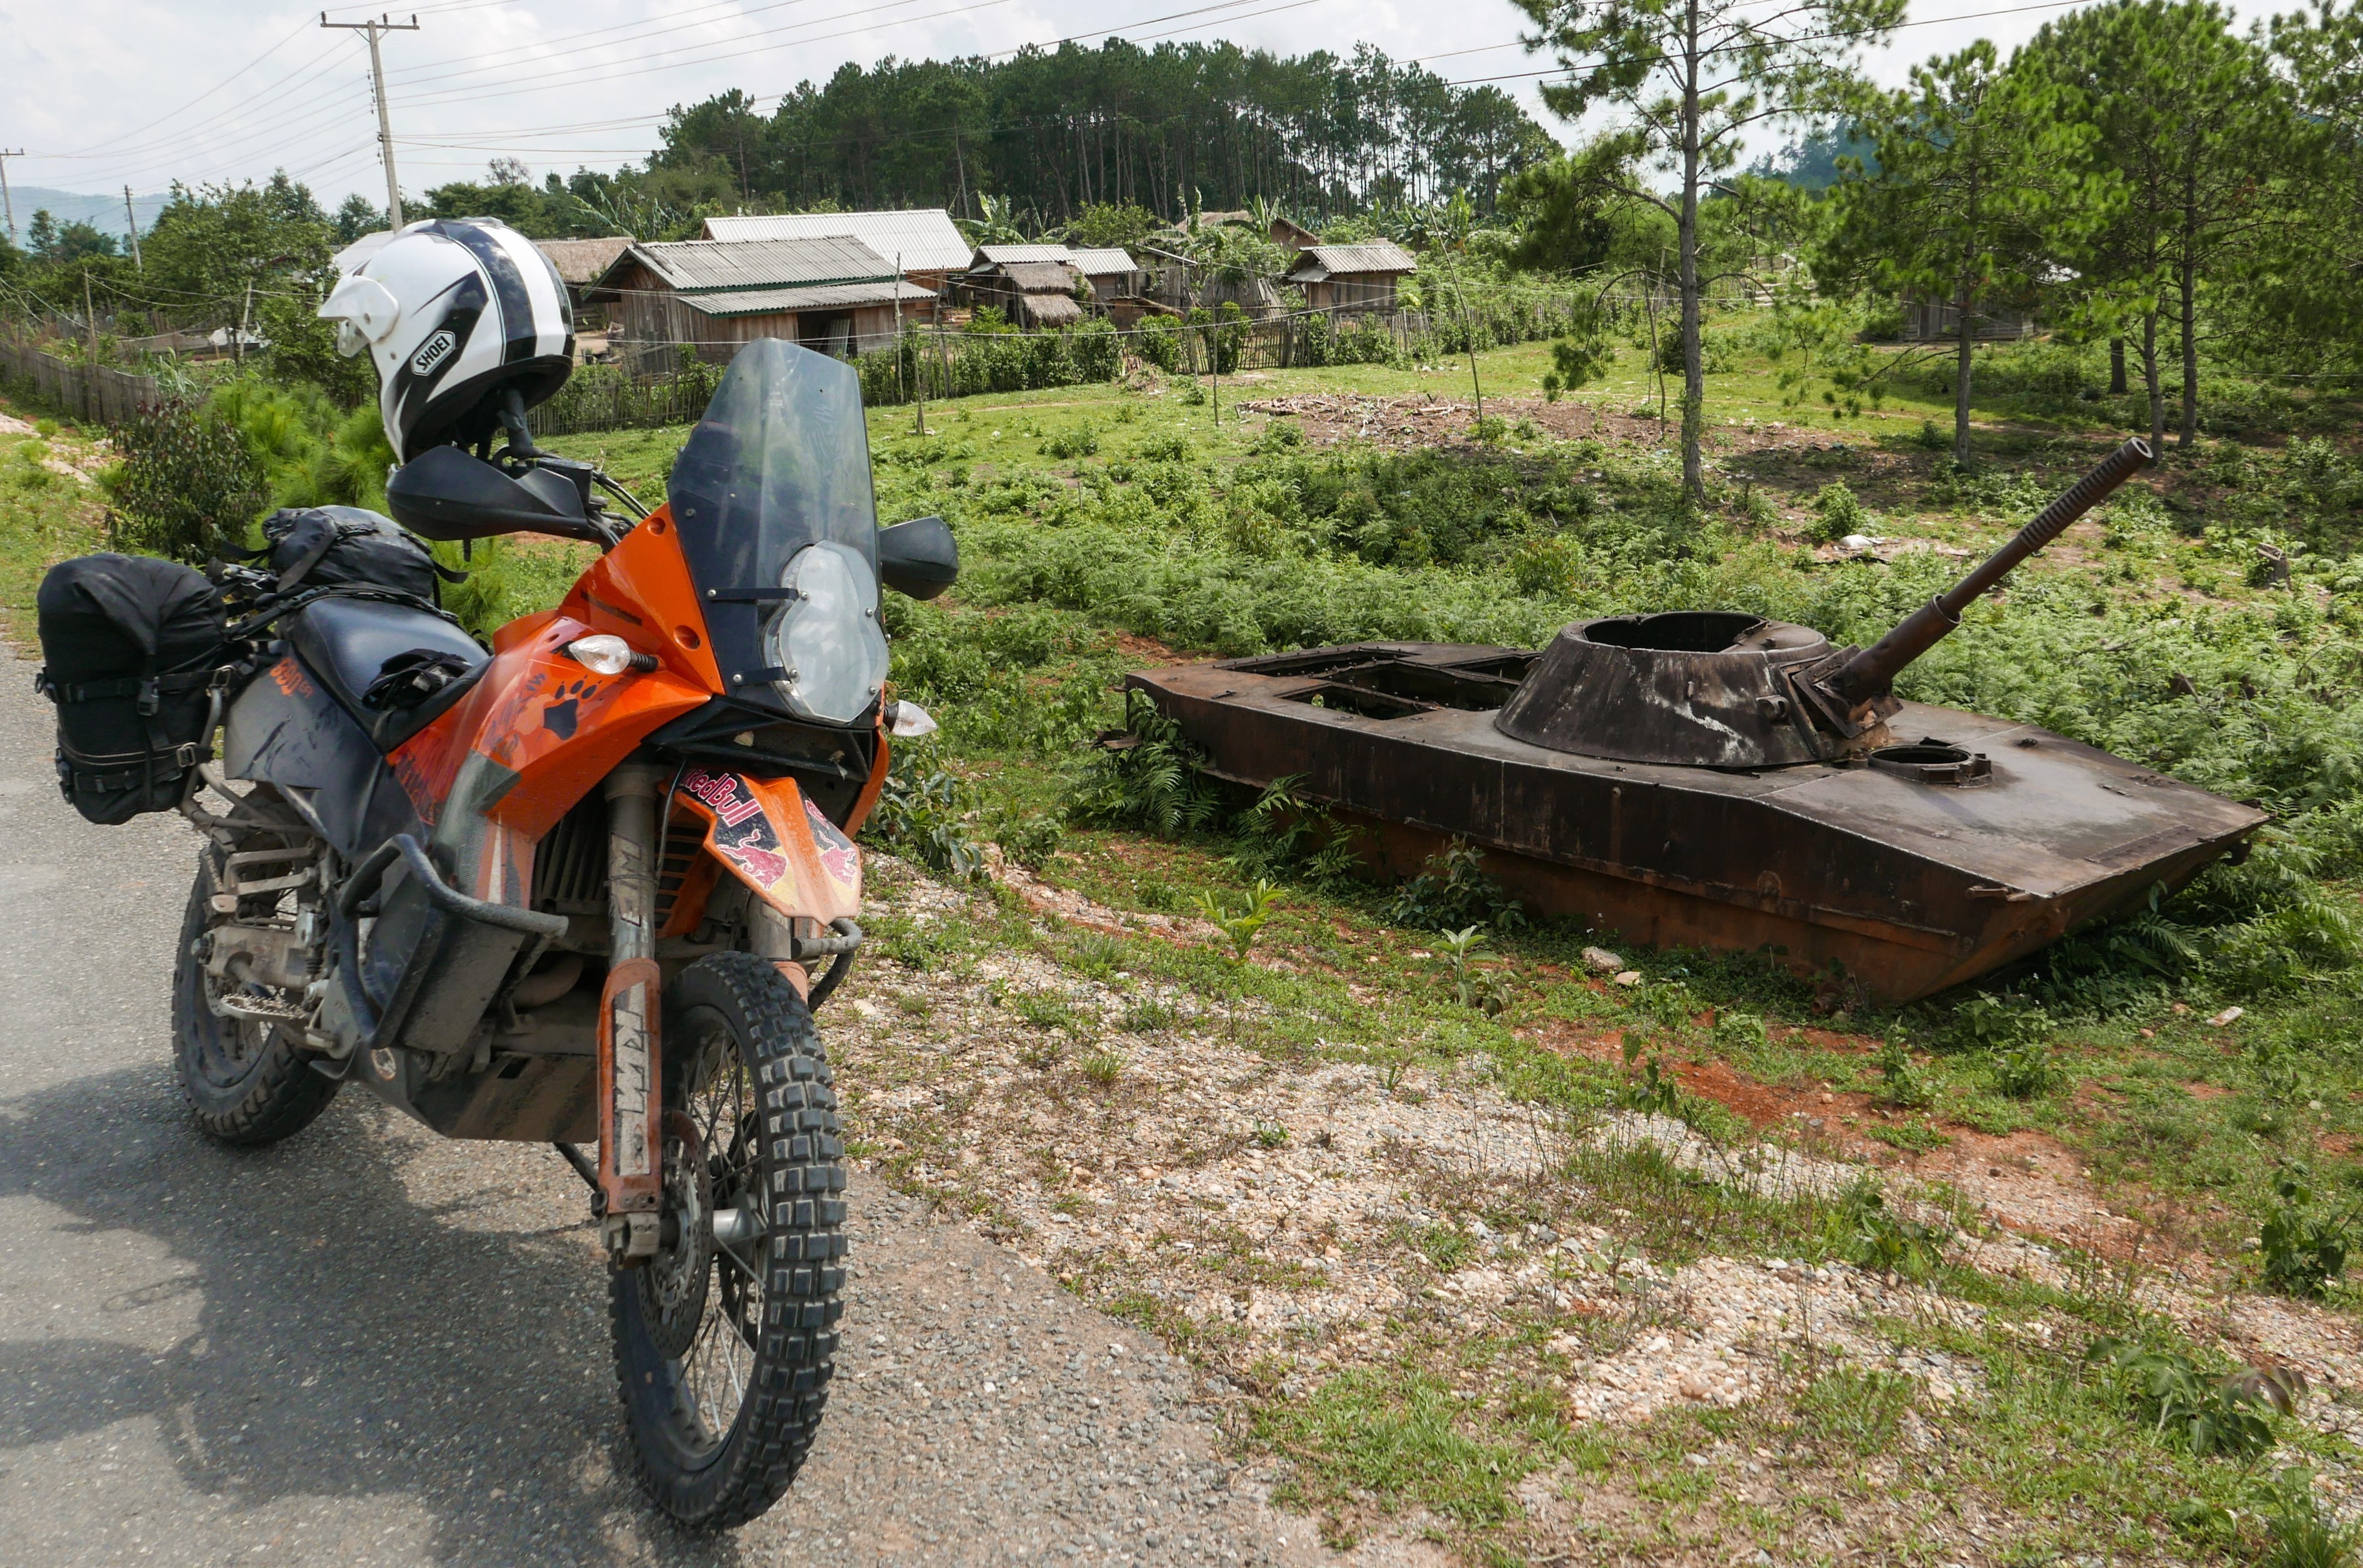 Laos motorcycle tours with Motoasia. Book our adventure motorcycle trip from Thailand to Laos and ride the Vietnam War roads along the Ho Chi Minh Trail.